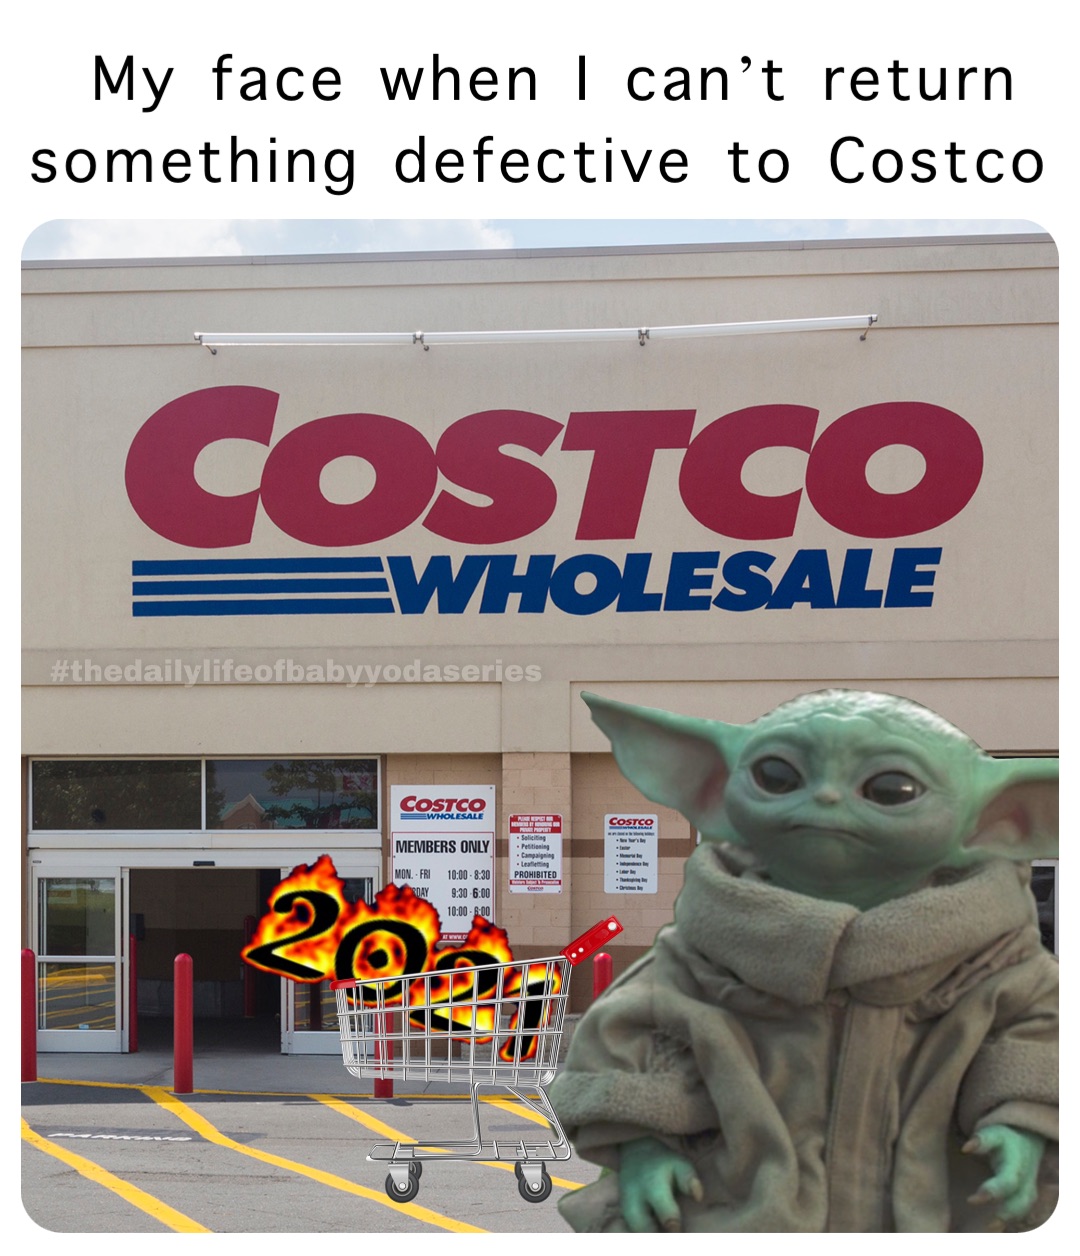 My face when I can’t return something defective to Costco